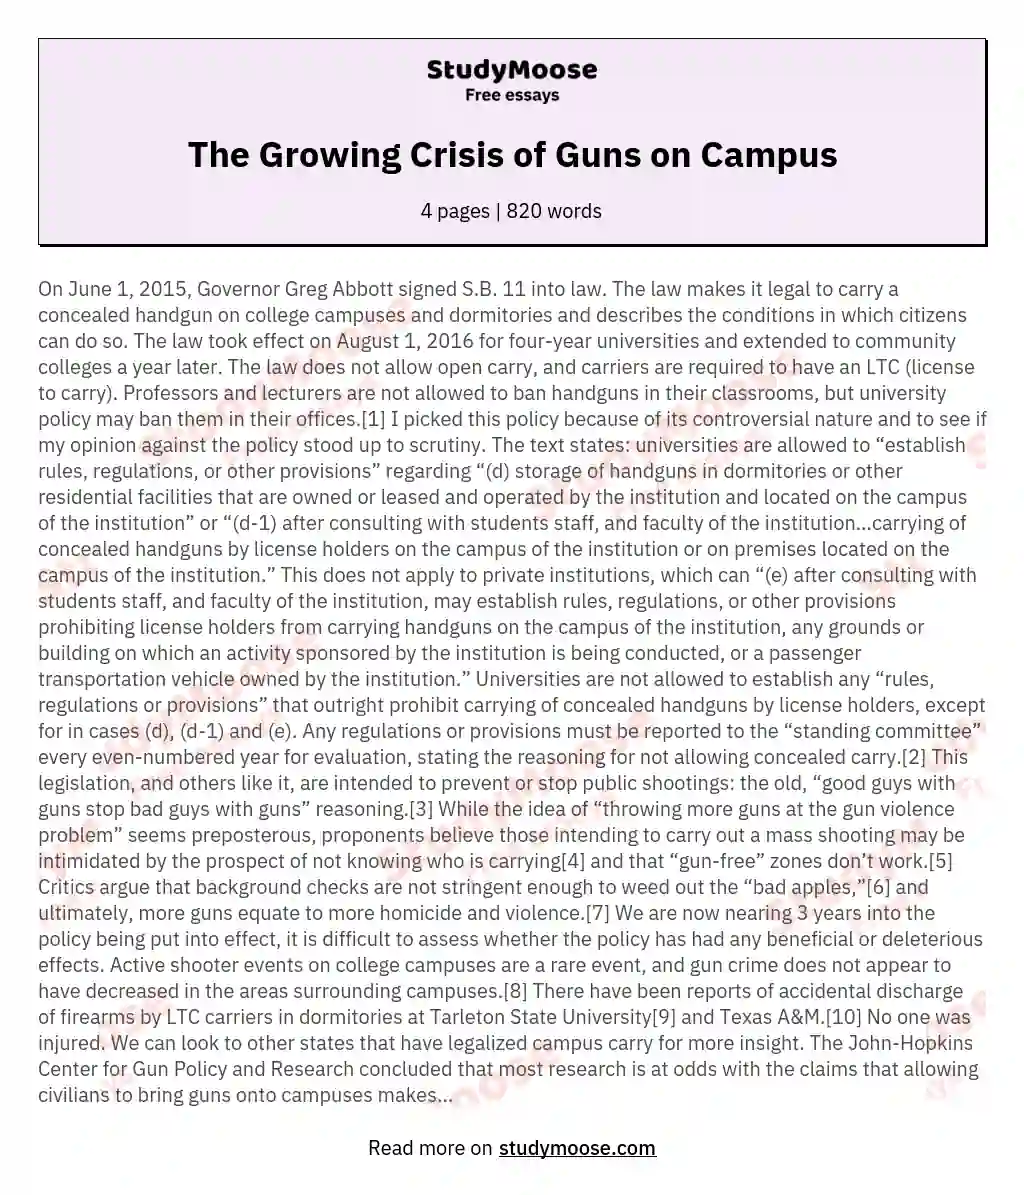 The Growing Crisis of Guns on Campus